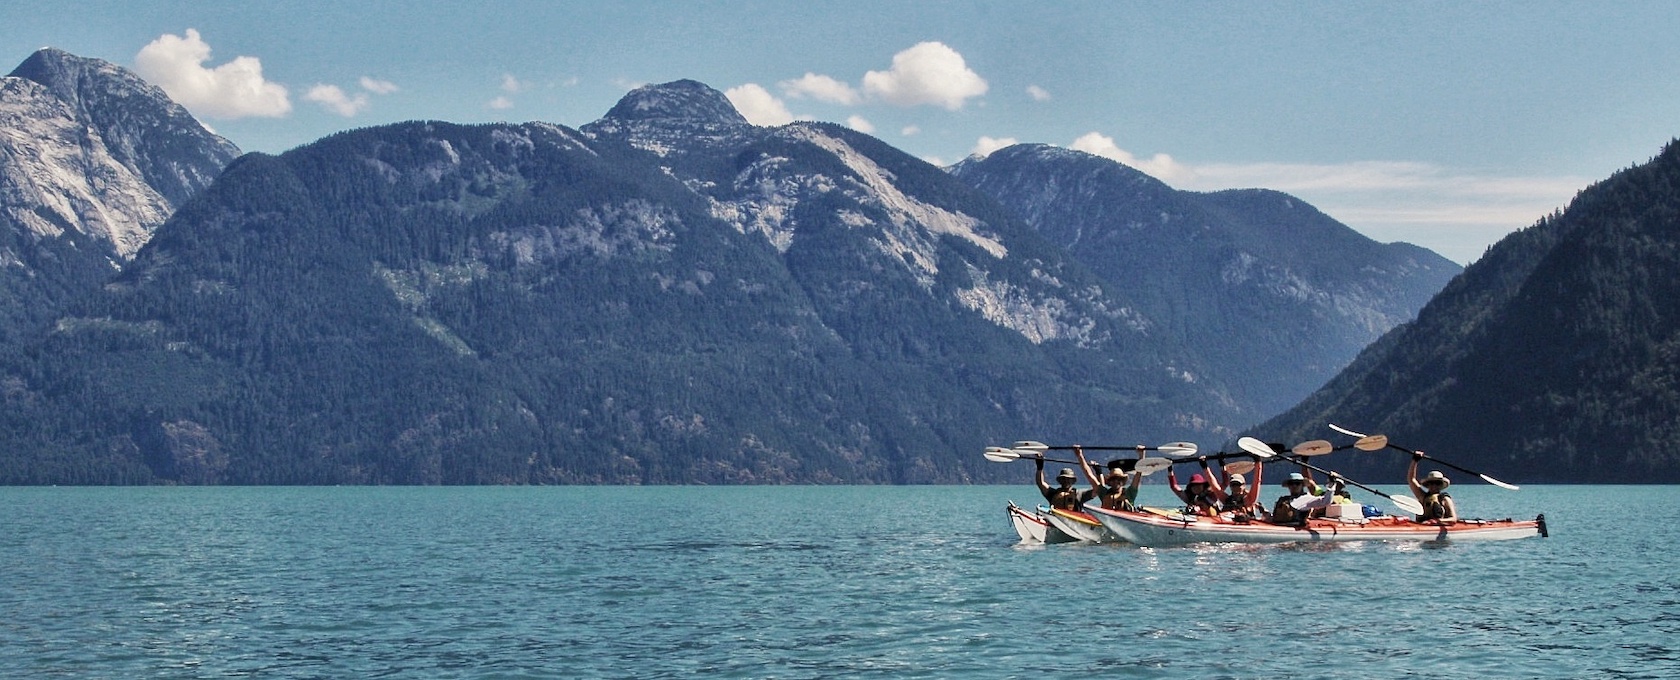 Picture moment in Toba Inlet on one of PRSKs sea kayak expeditions